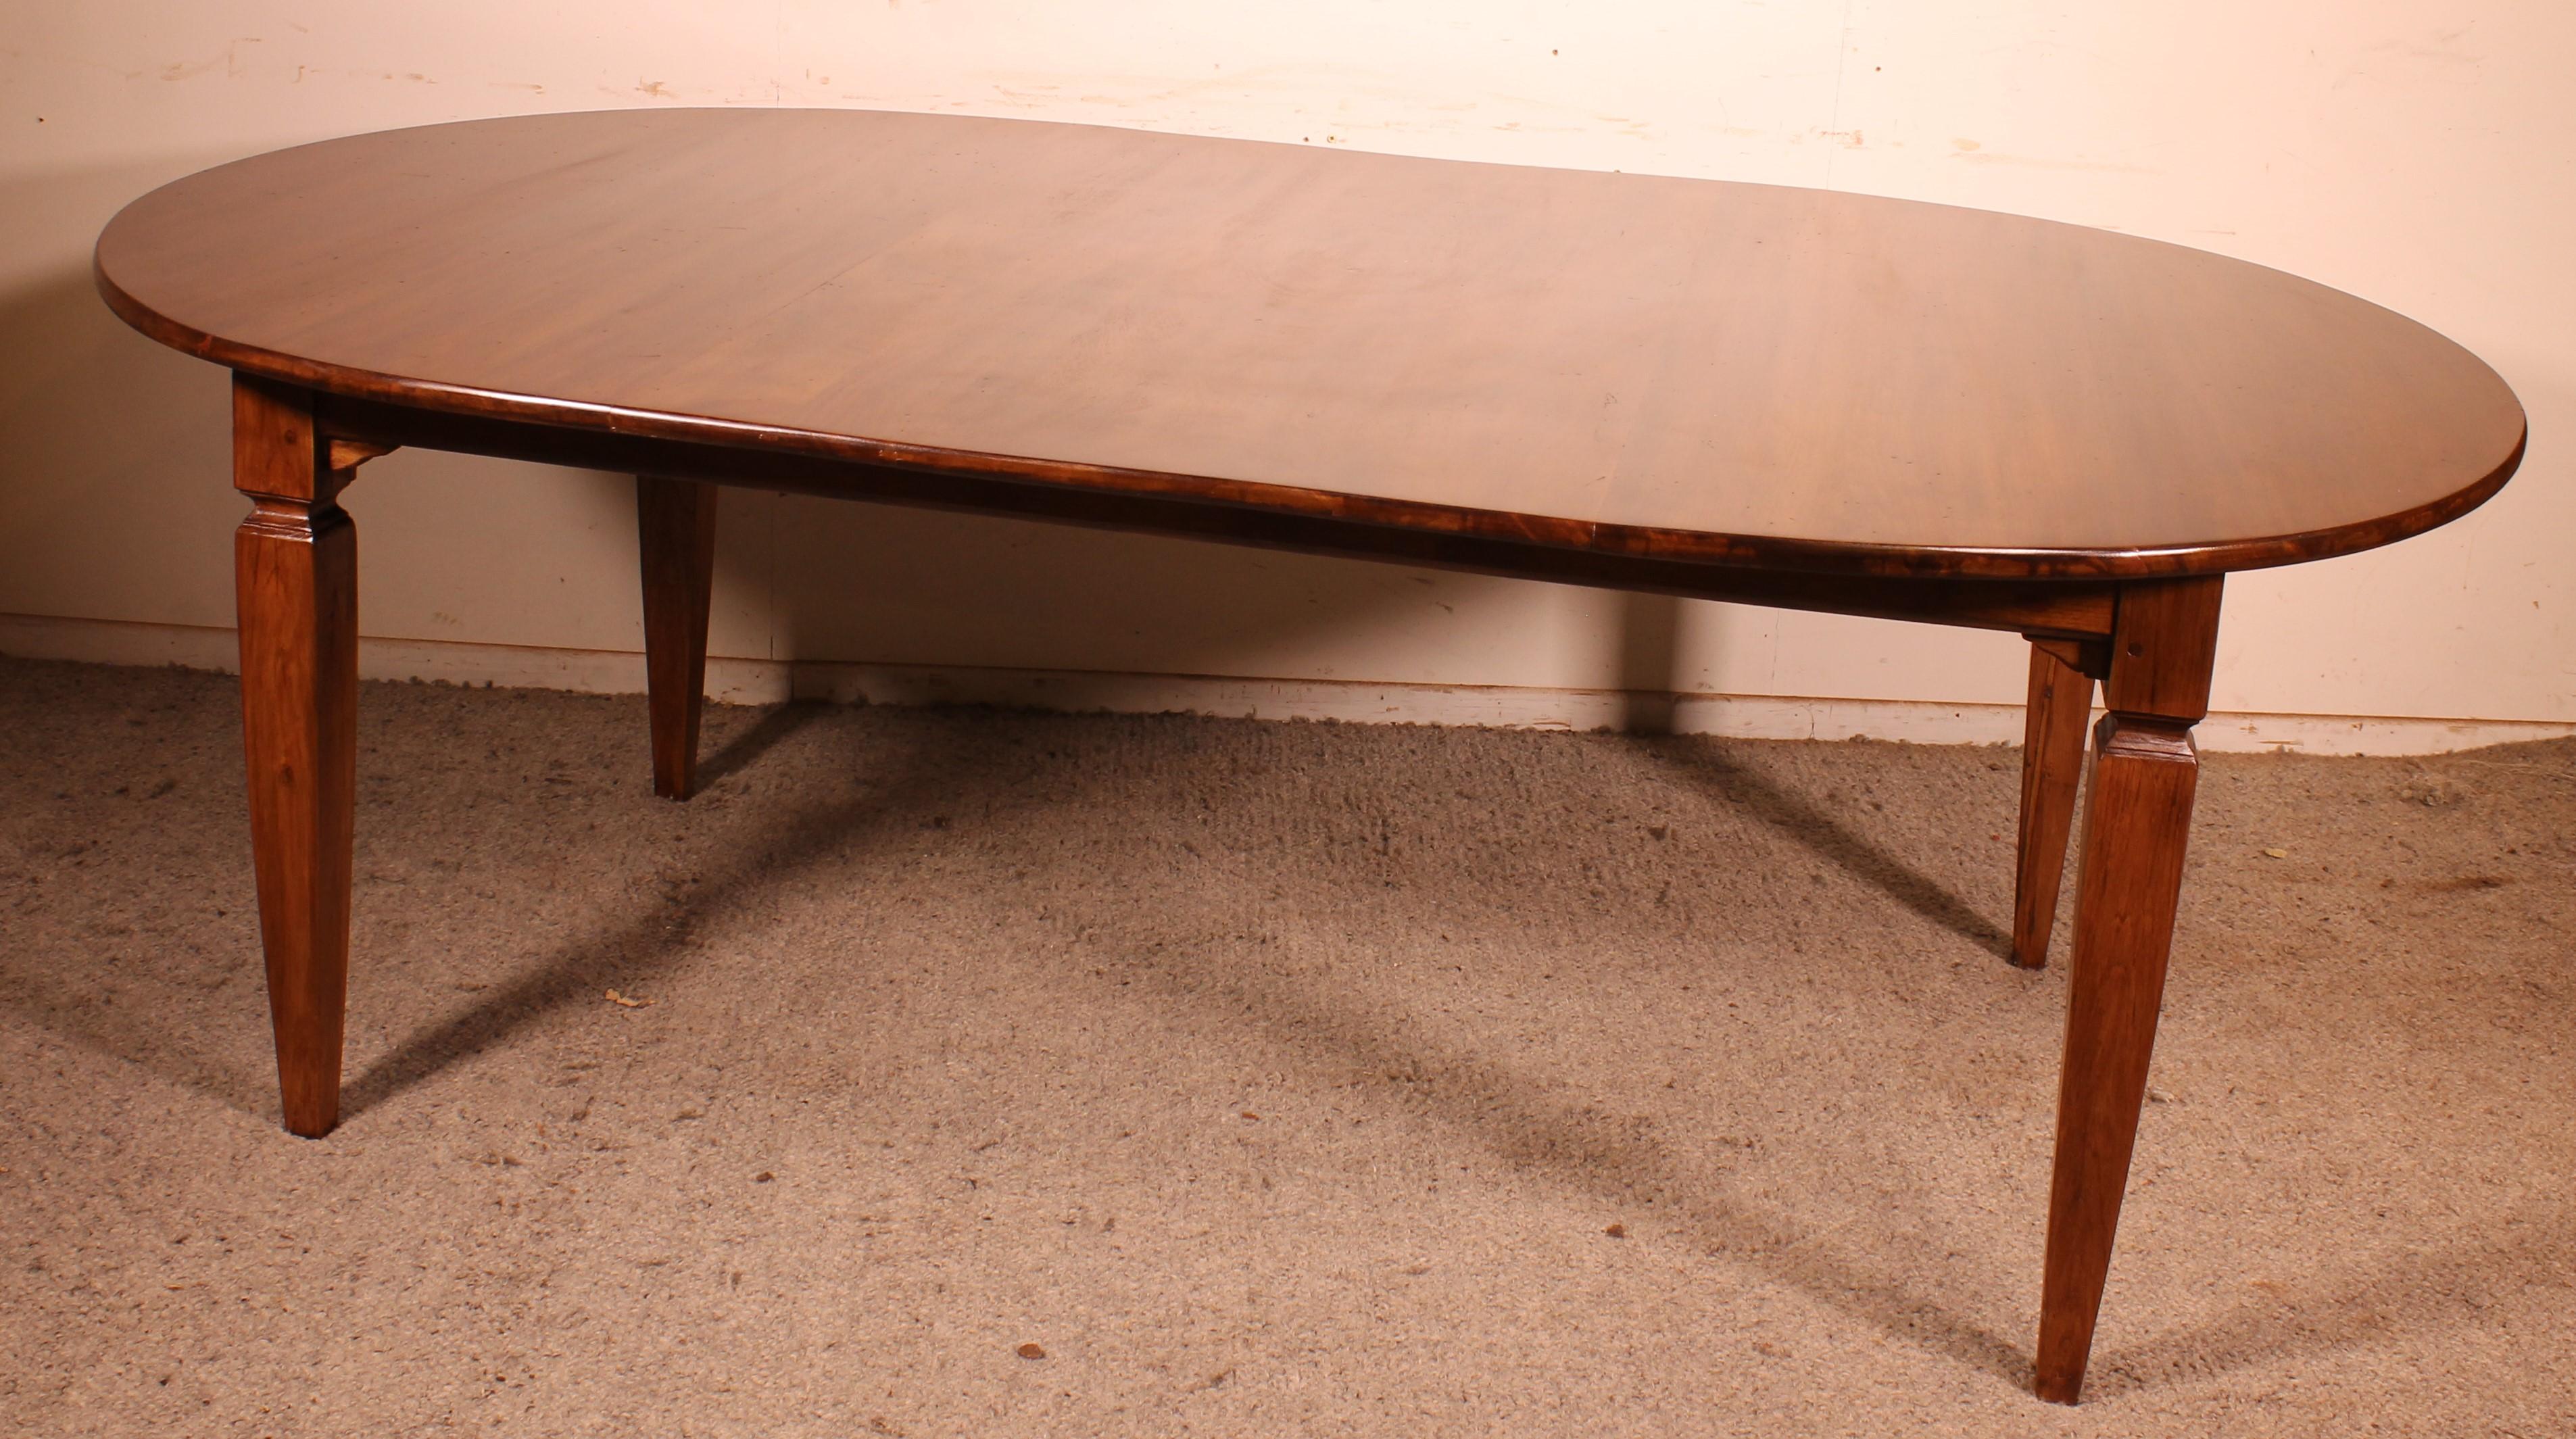 superb large 19th century oval-shaped refectory table in walnut from France
It is unusual to find an oval table in these dimensions which, thanks to its shape, can accommodate 10-12 people

Very beautiful walnut top which has a superb patina and a